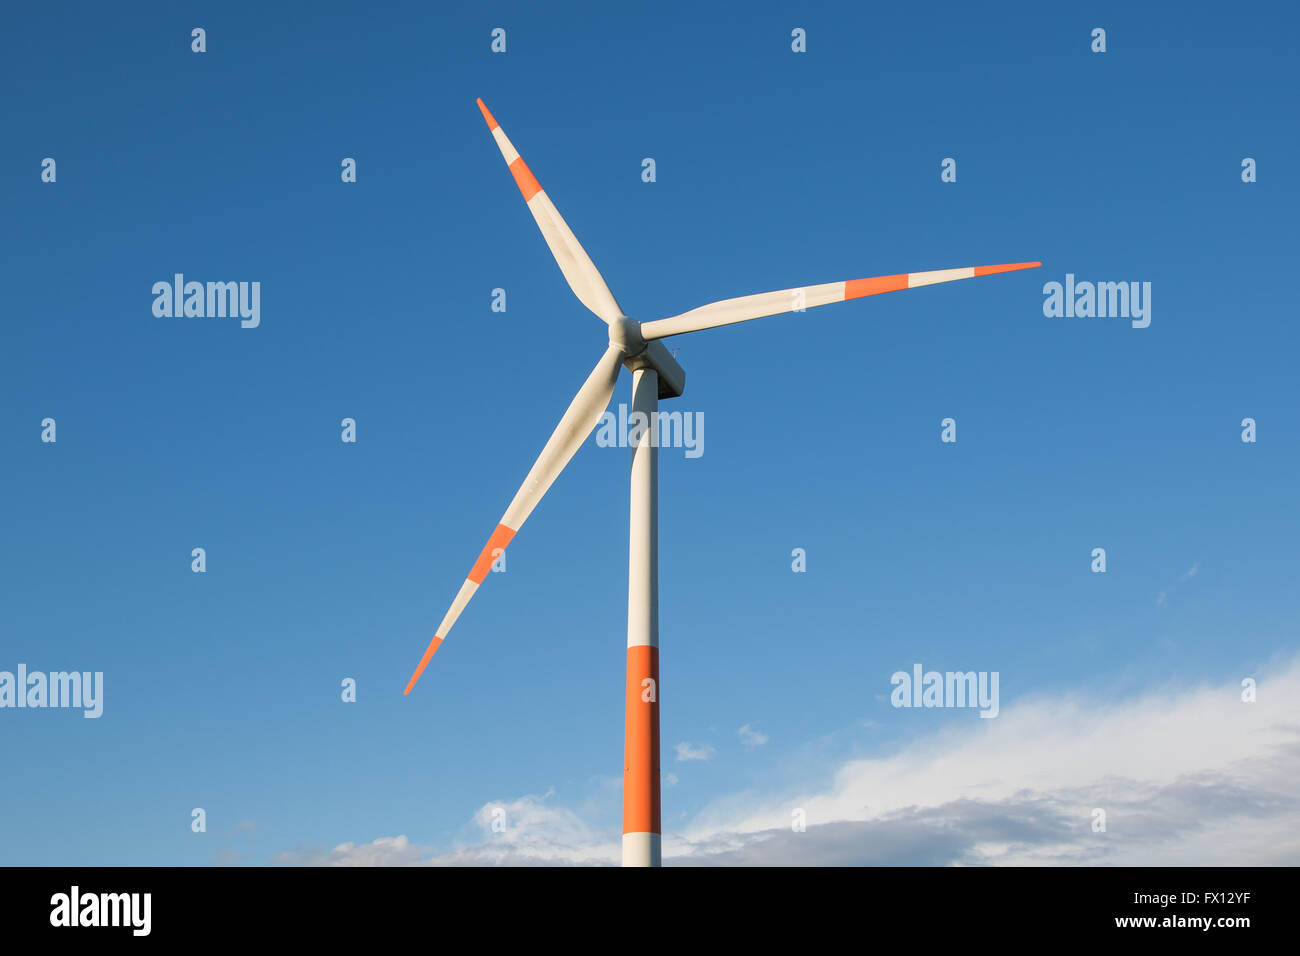 Red and white wind turbine against a blue sky Stock Photo